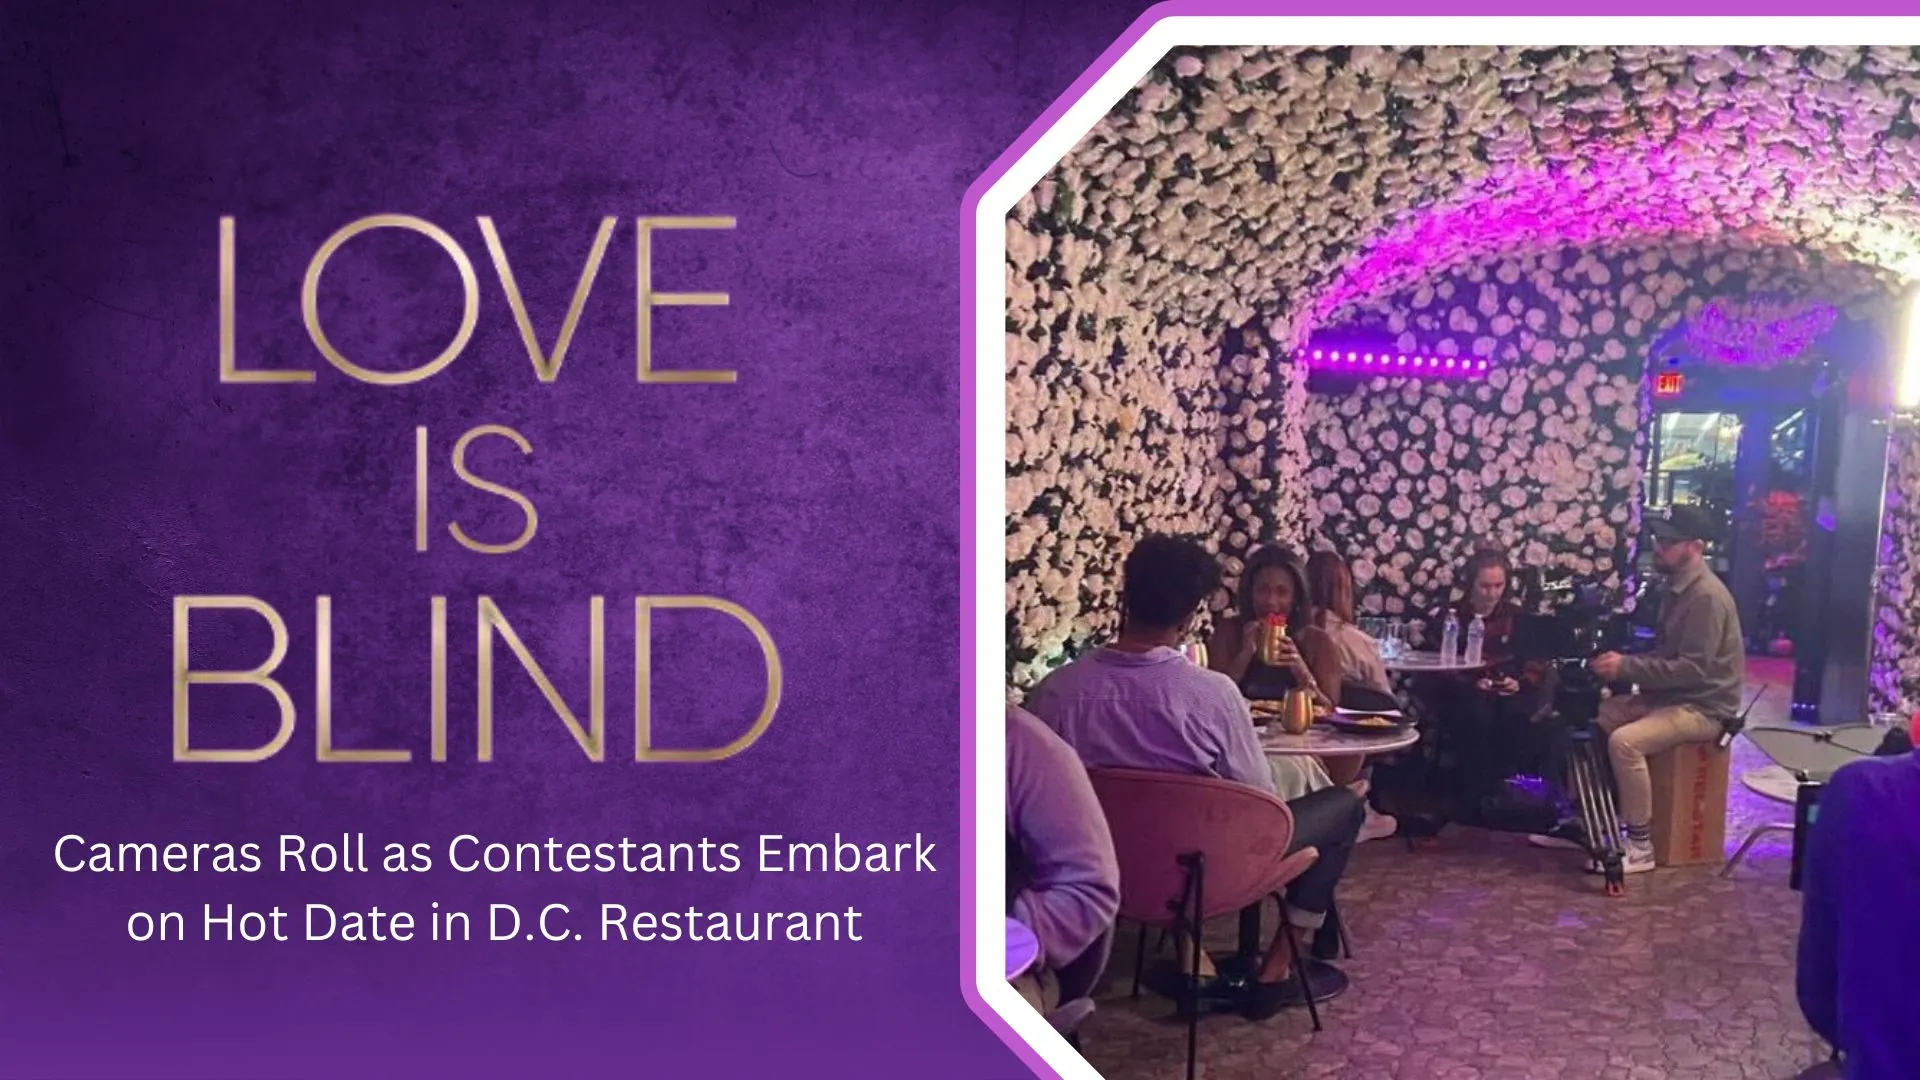 Love is Blind Cameras Roll as Contestants Embark on Hot Date in D.C. Restaurant